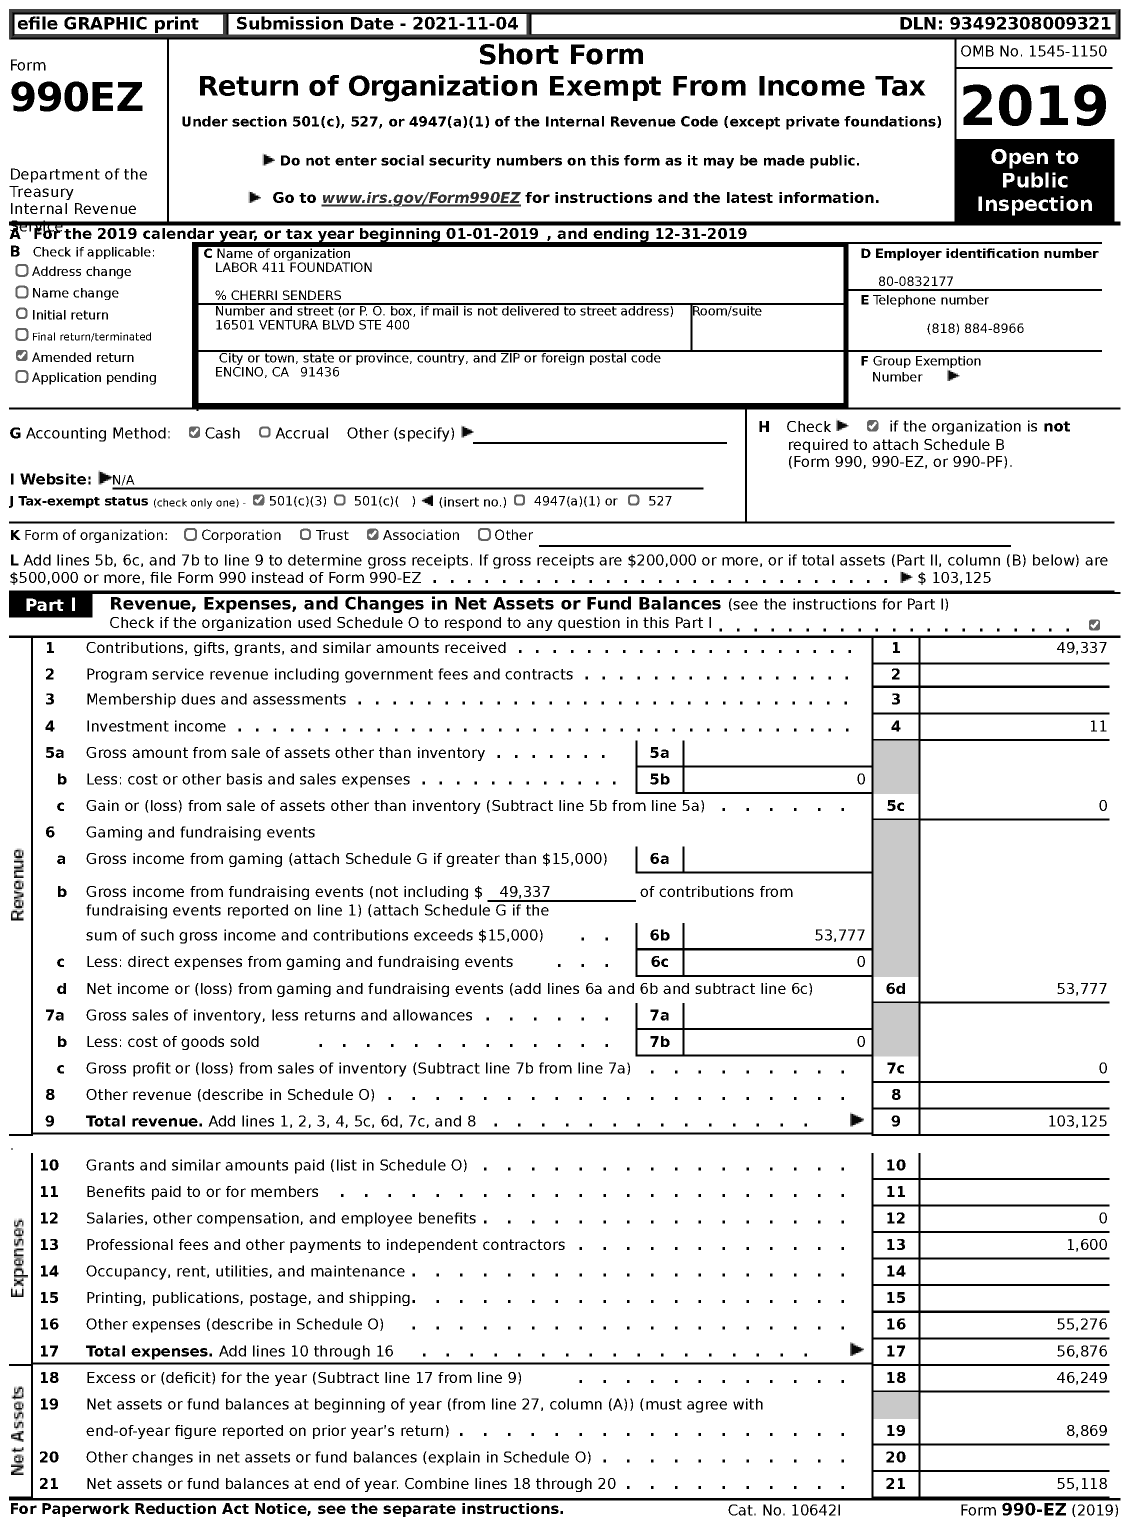 Image of first page of 2019 Form 990EZ for Labor 411 Foundation